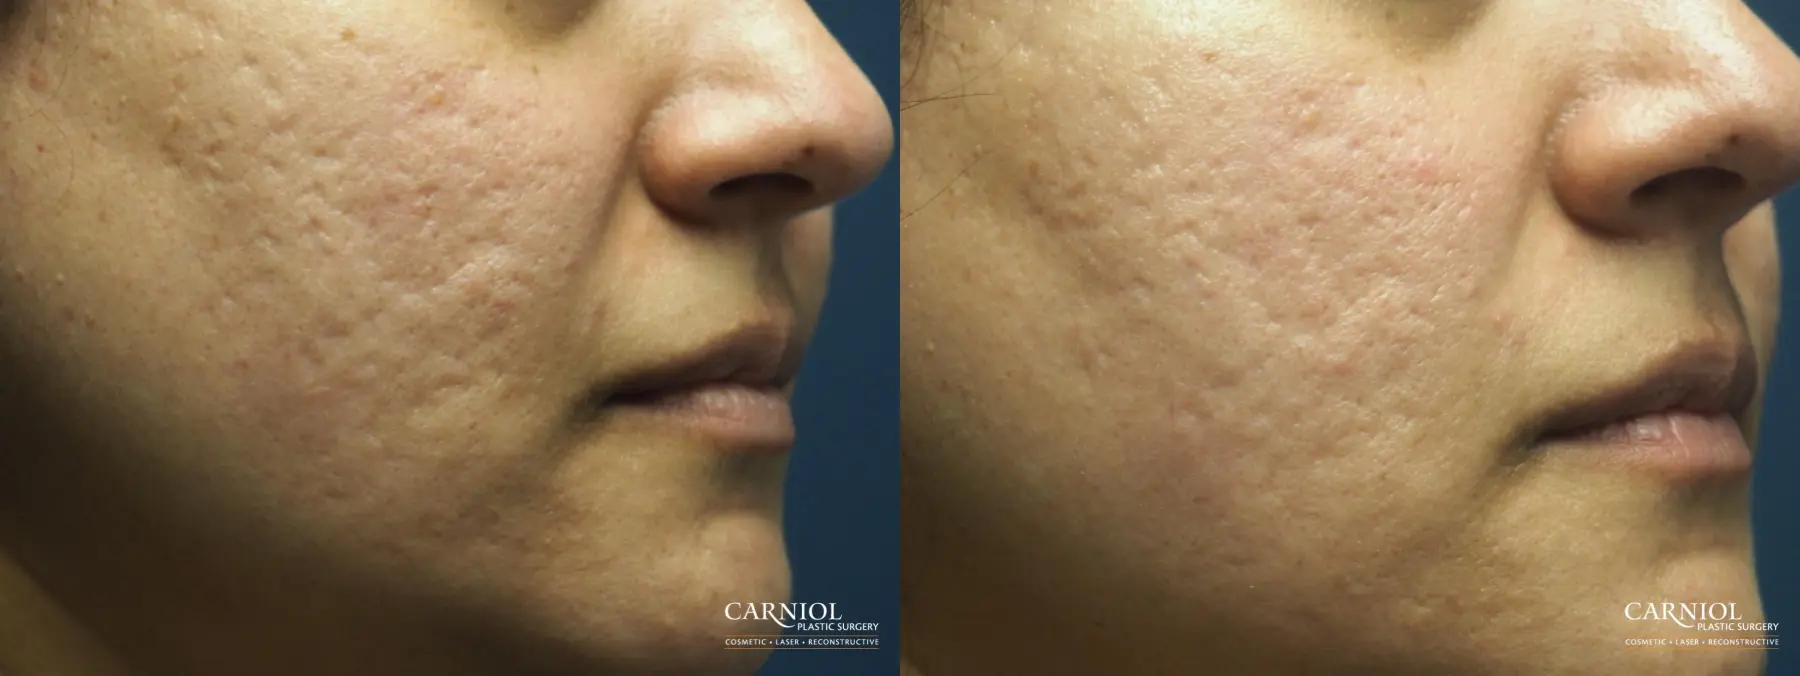 Acne Scars: Patient 4 - Before and After  